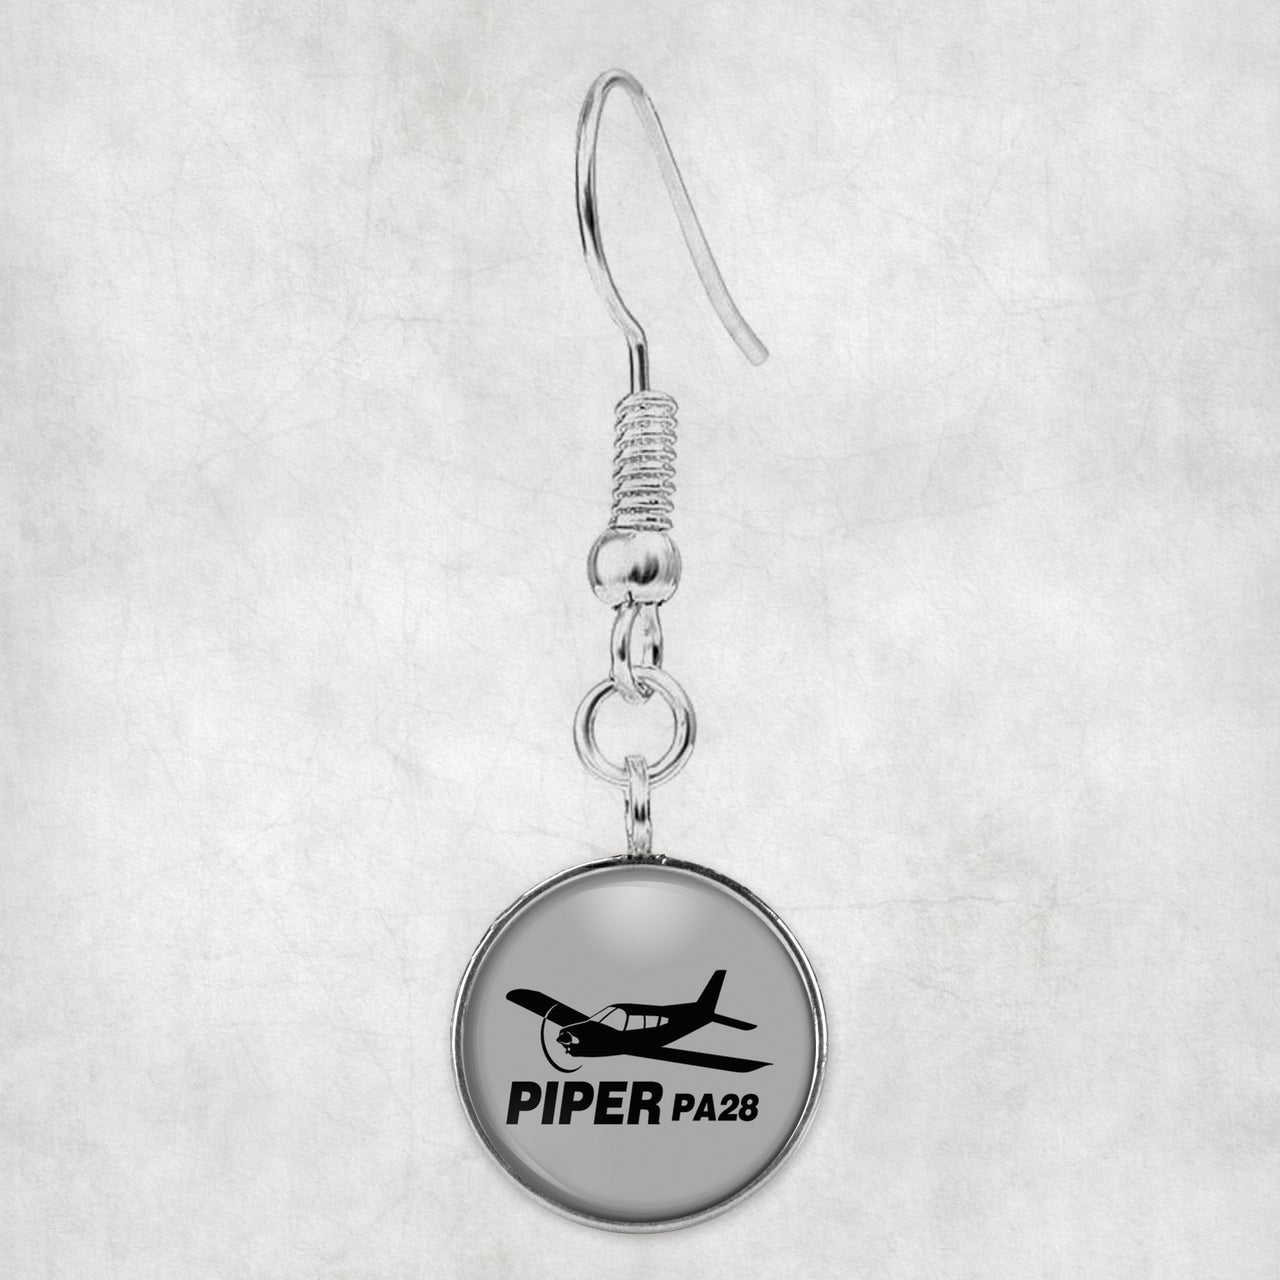 The Piper PA28 Designed Earrings